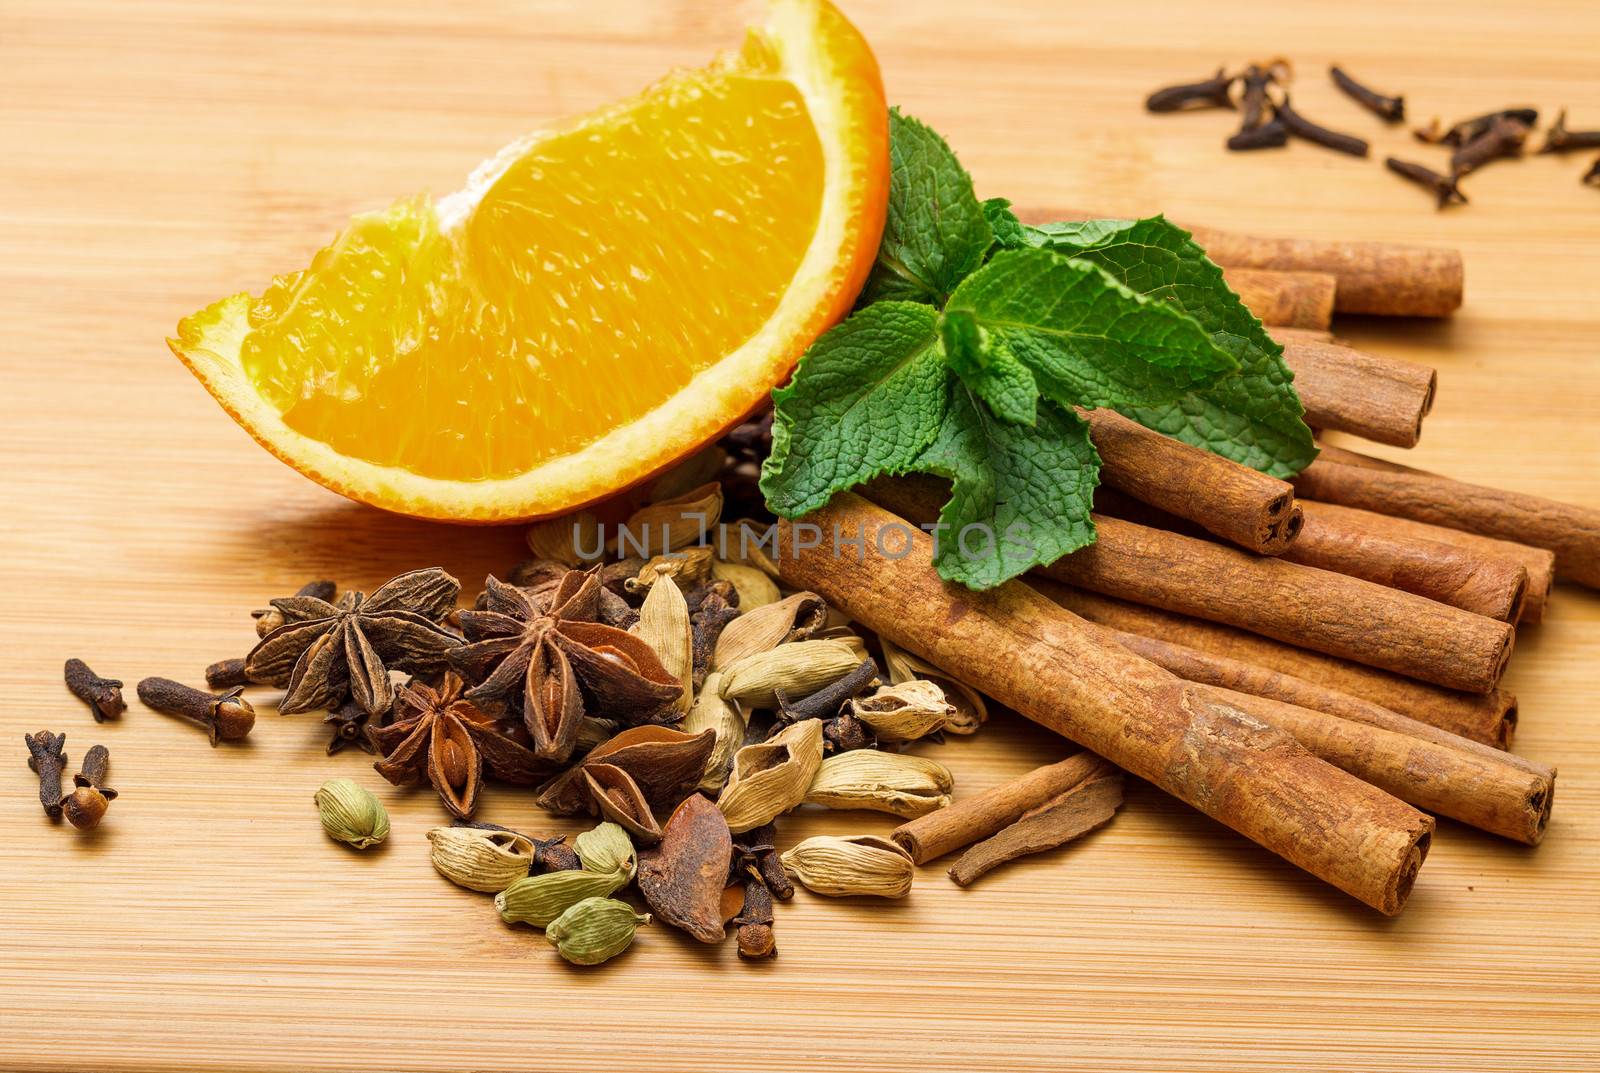 Multicolored spice with orange closeup on wooden background